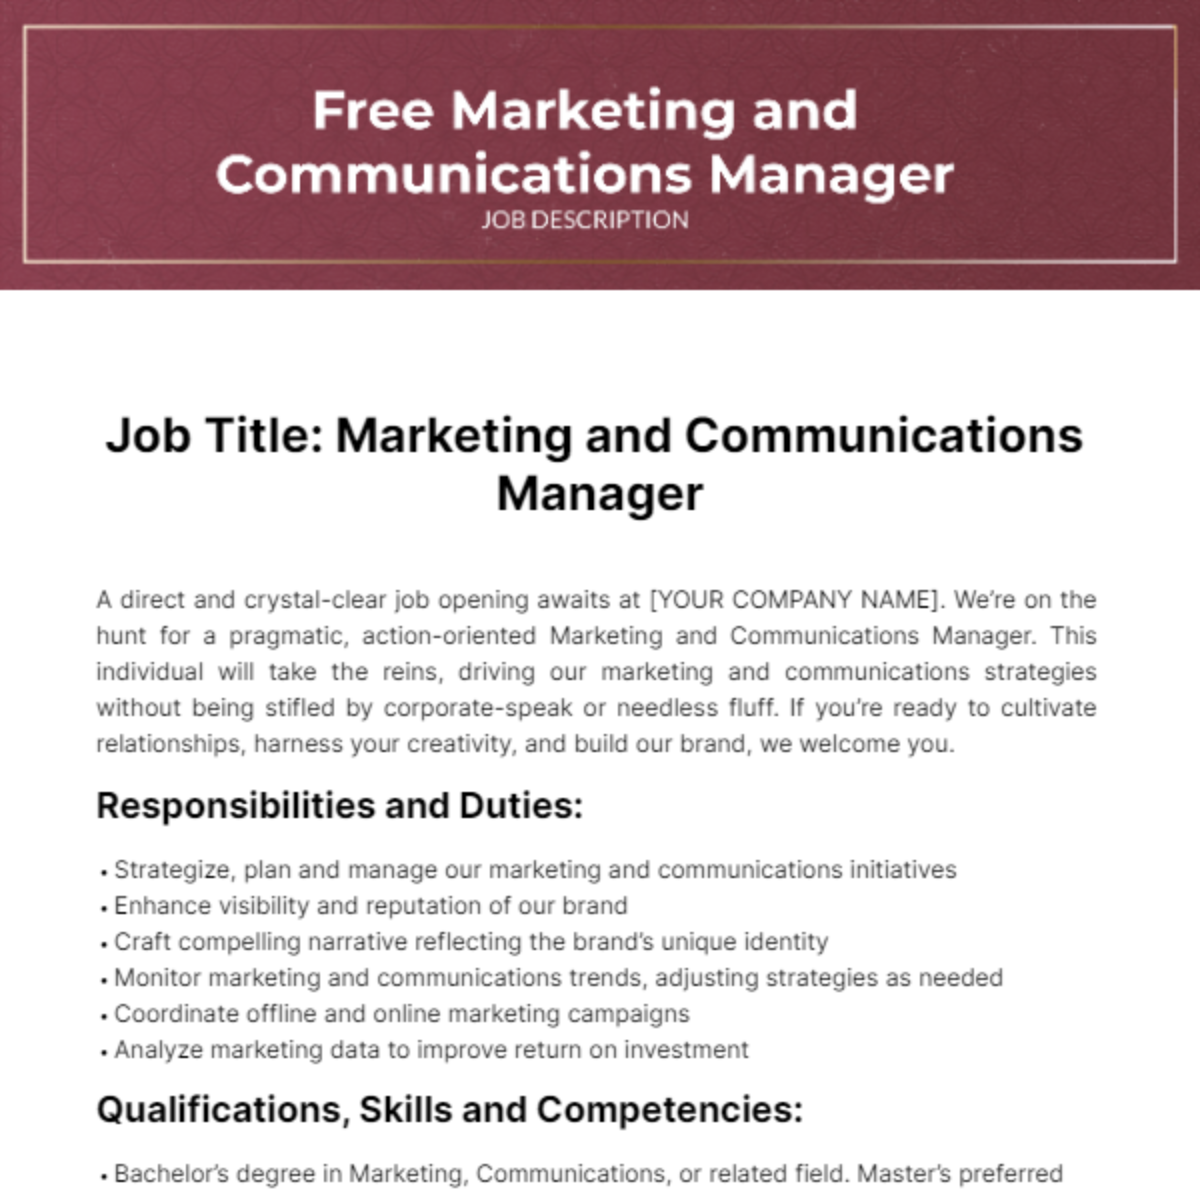 Free Marketing and Communications Manager Job Description Template